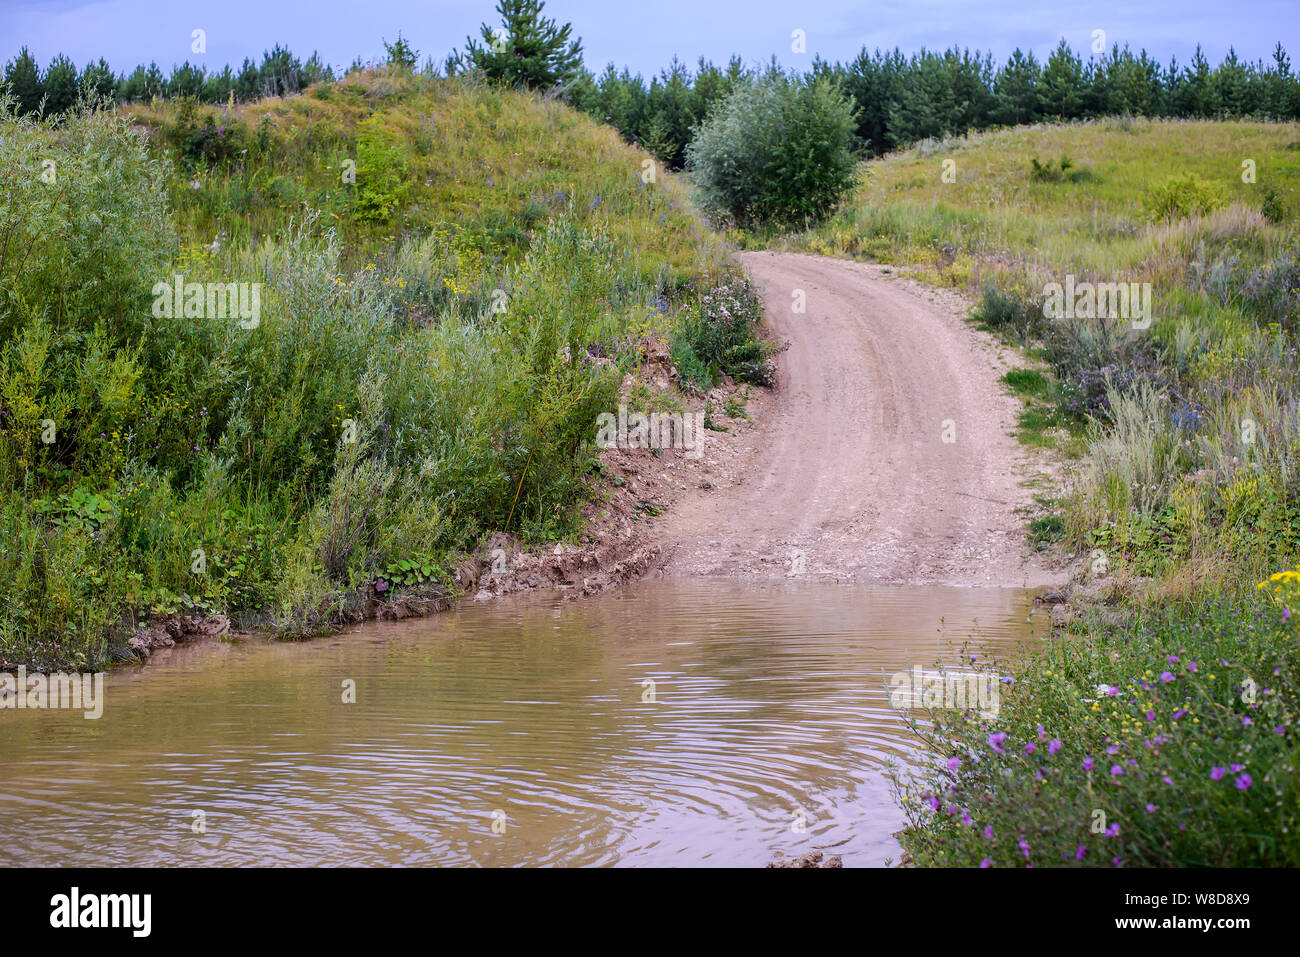 Rural road in the field goes under water in the pond Stock Photo